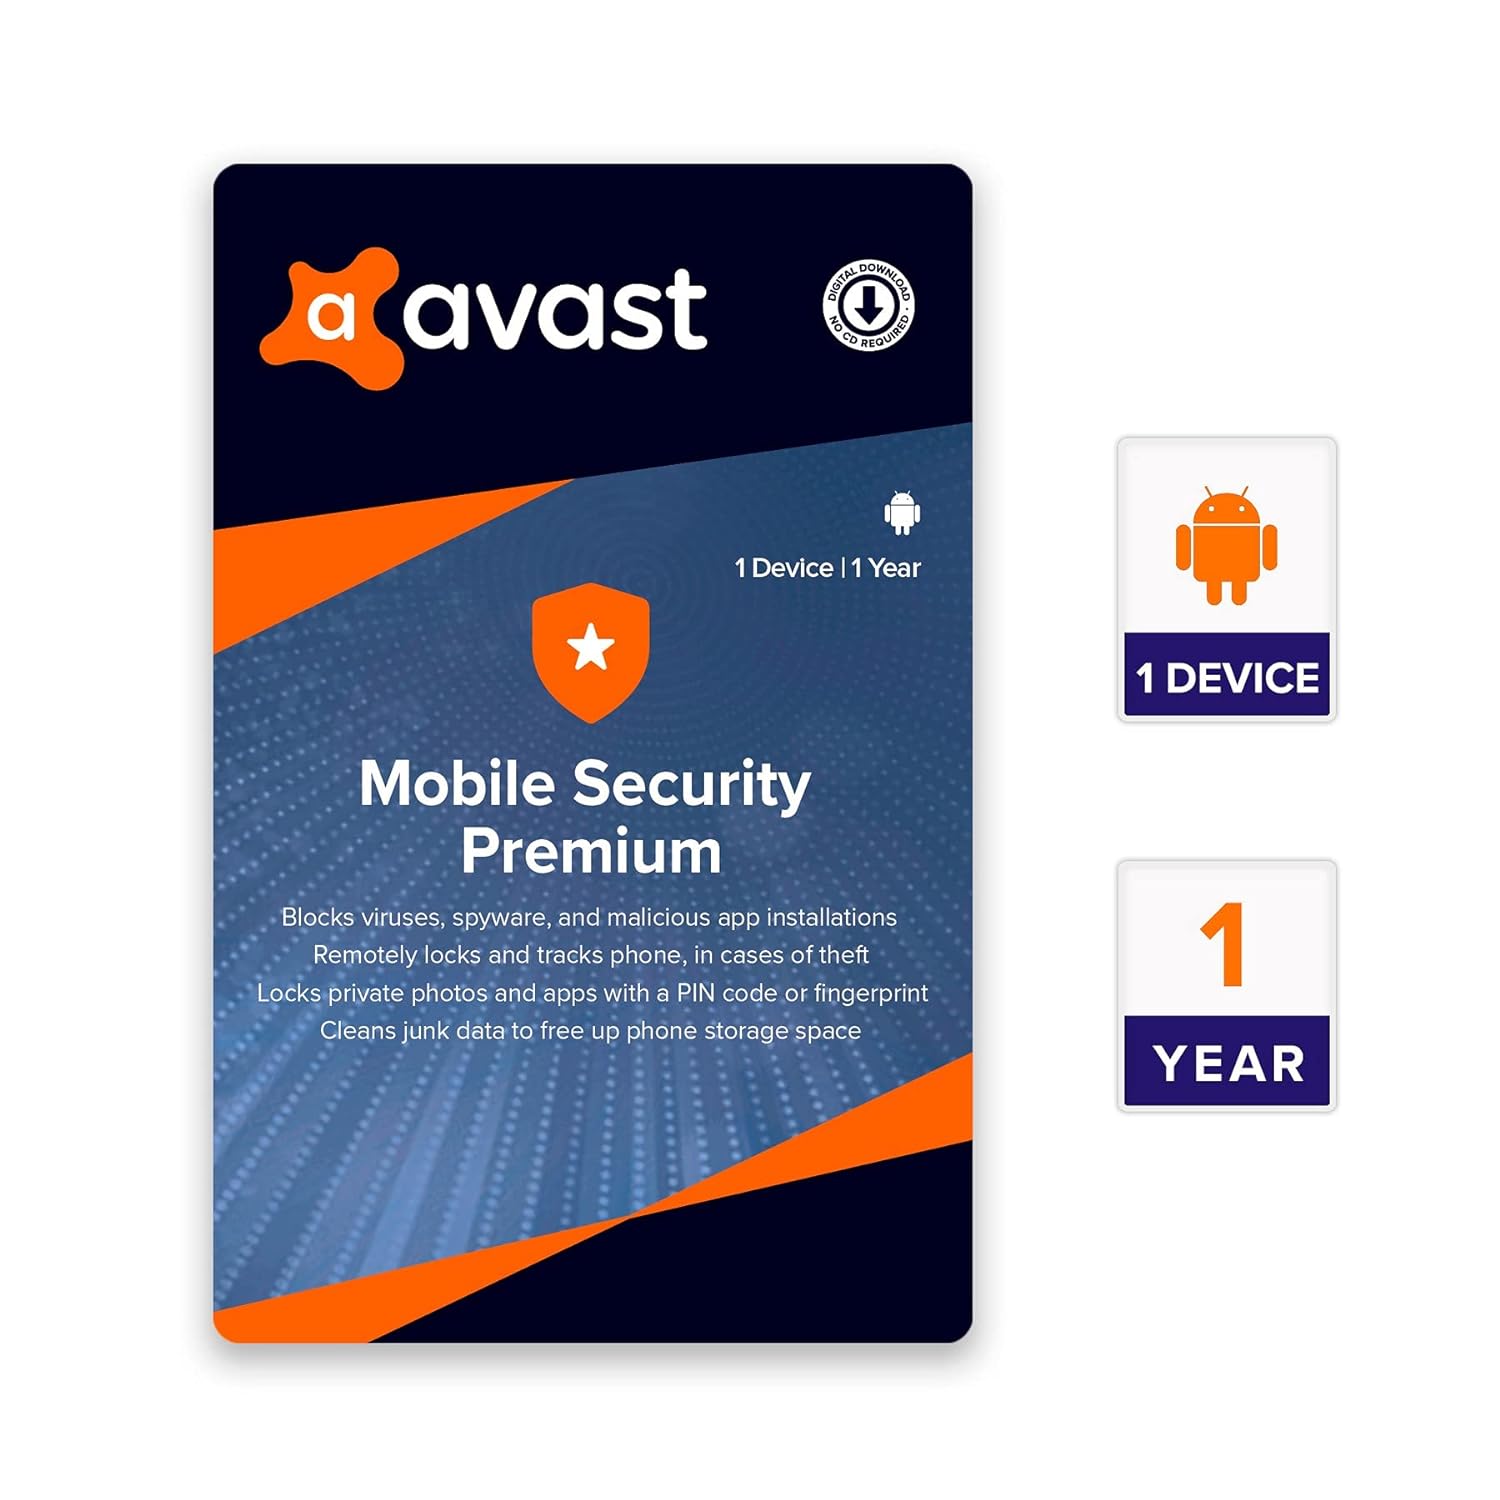 Avast Ultimate Mobile Security Premium for Android 2023 Key (1 Year / 1 Device) 7.41 usd